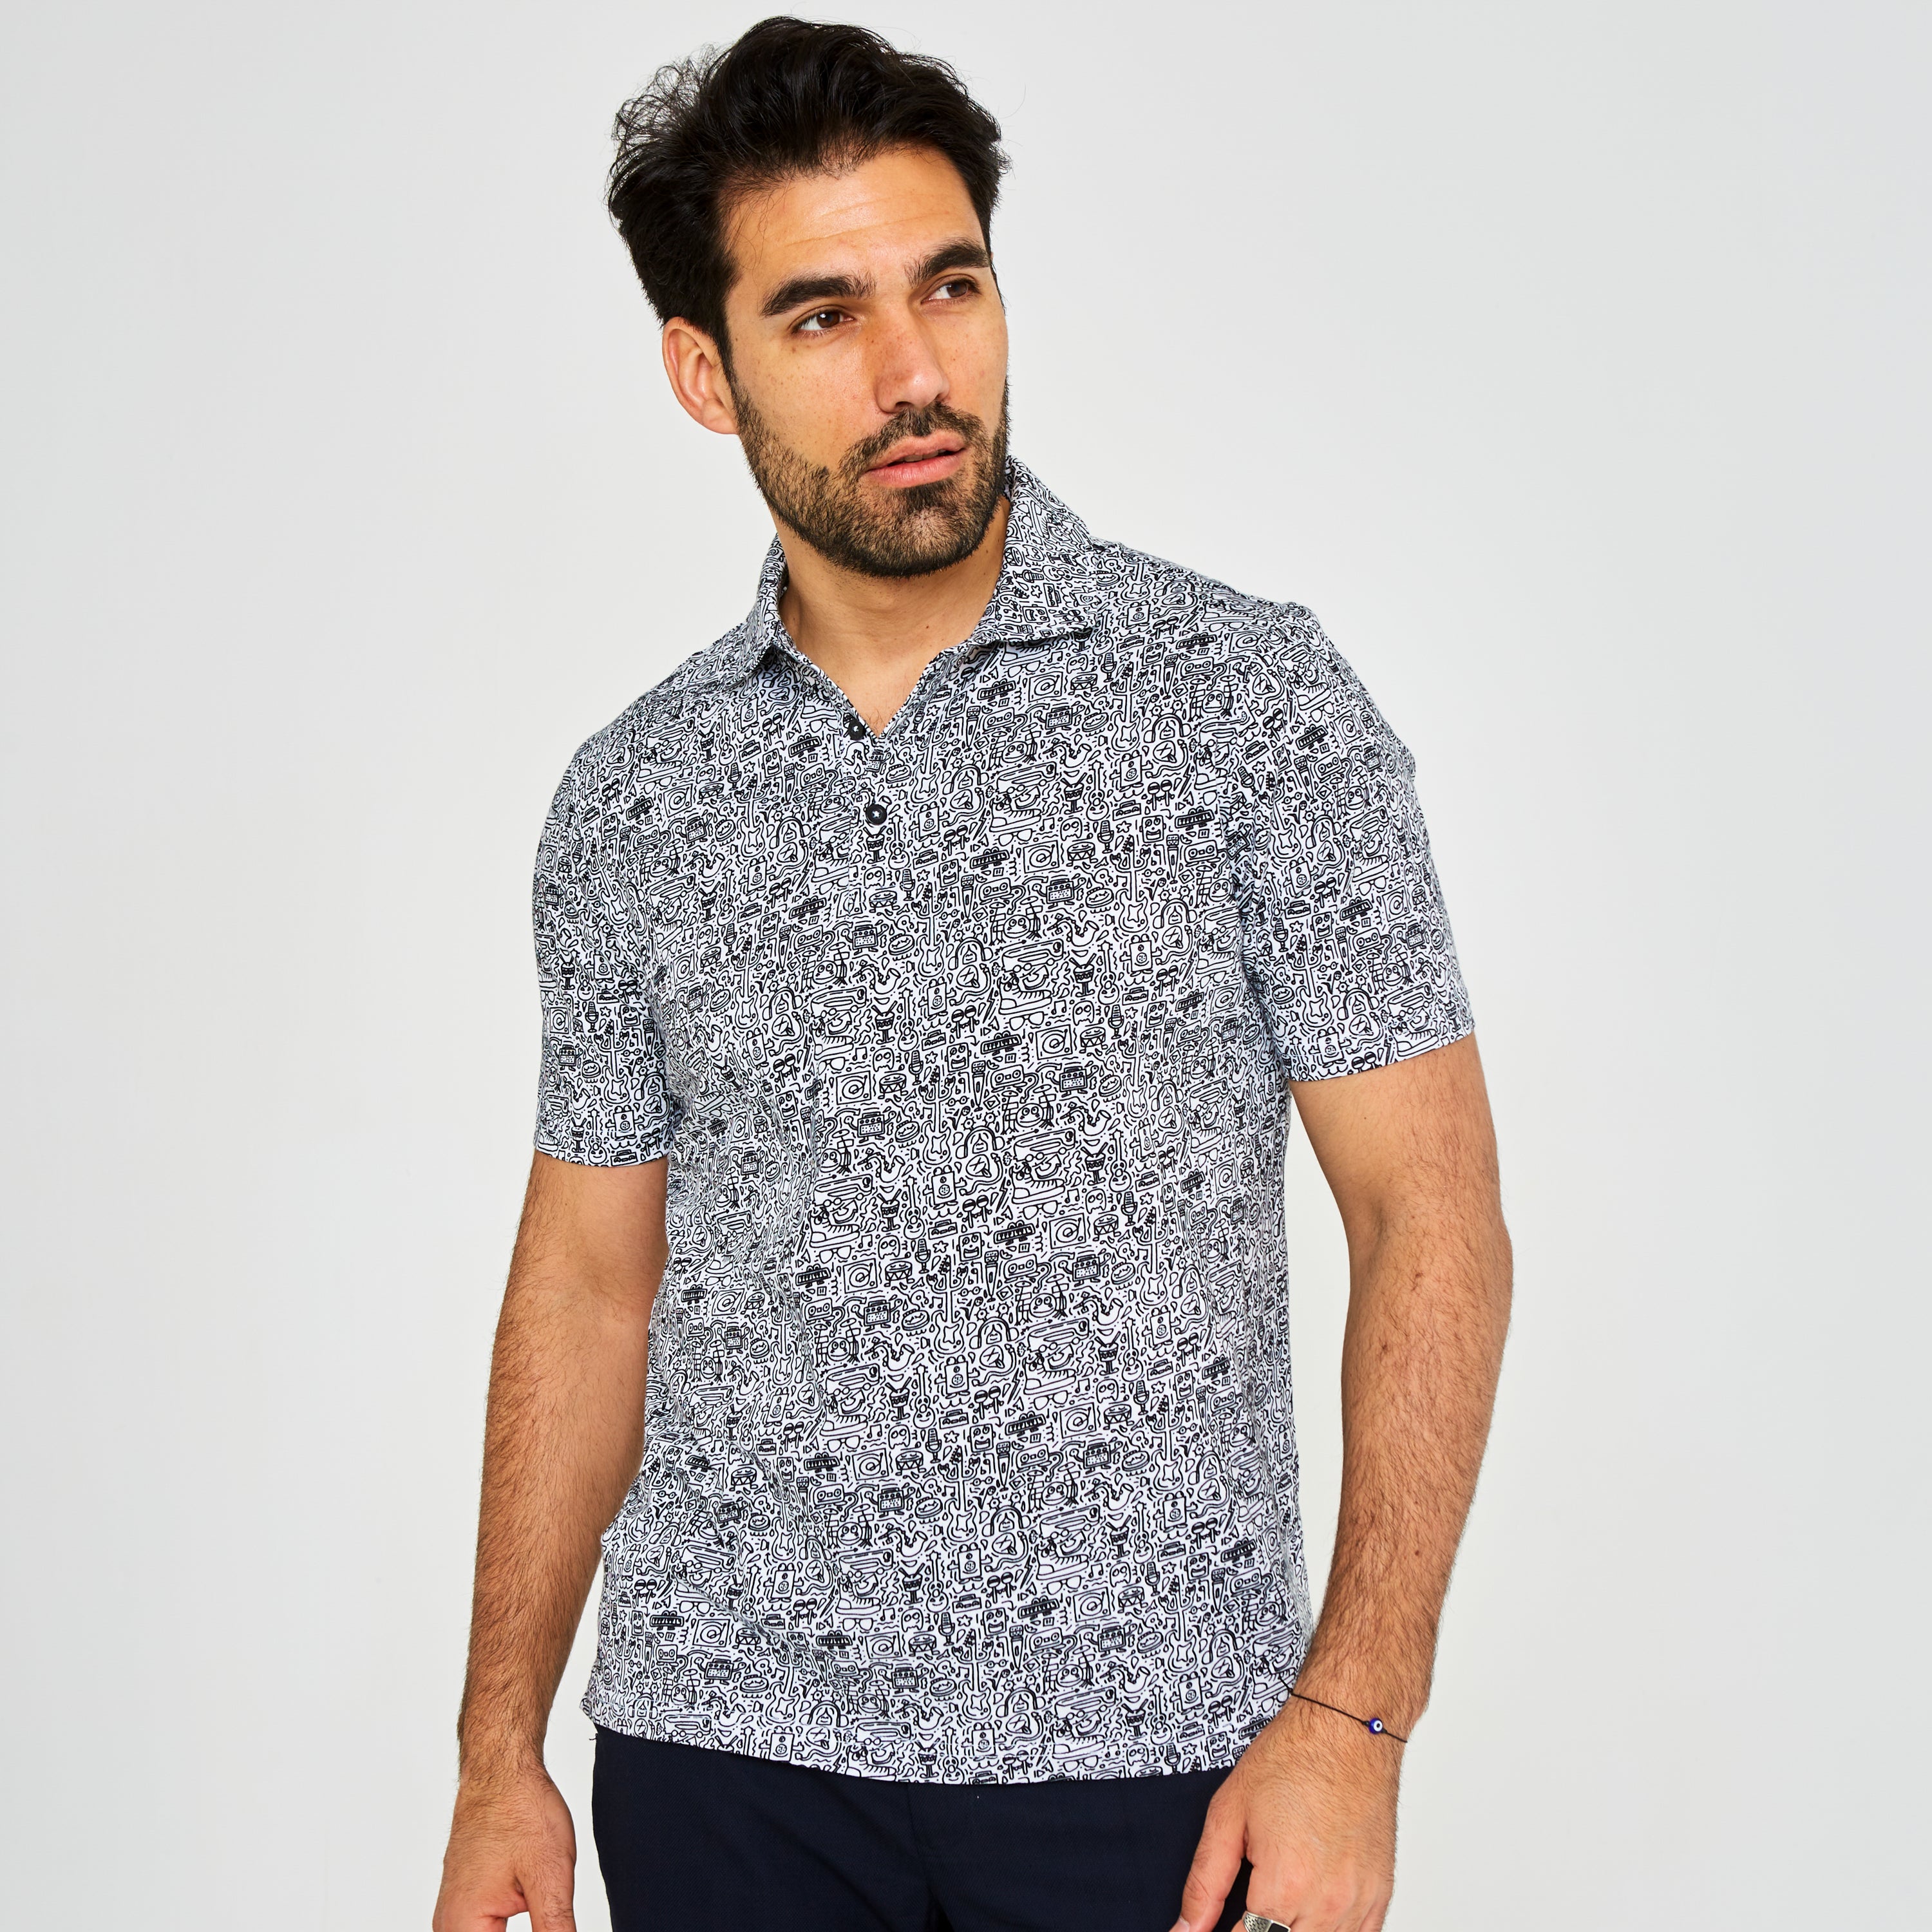 Doodle Art Printed Jersey Polo